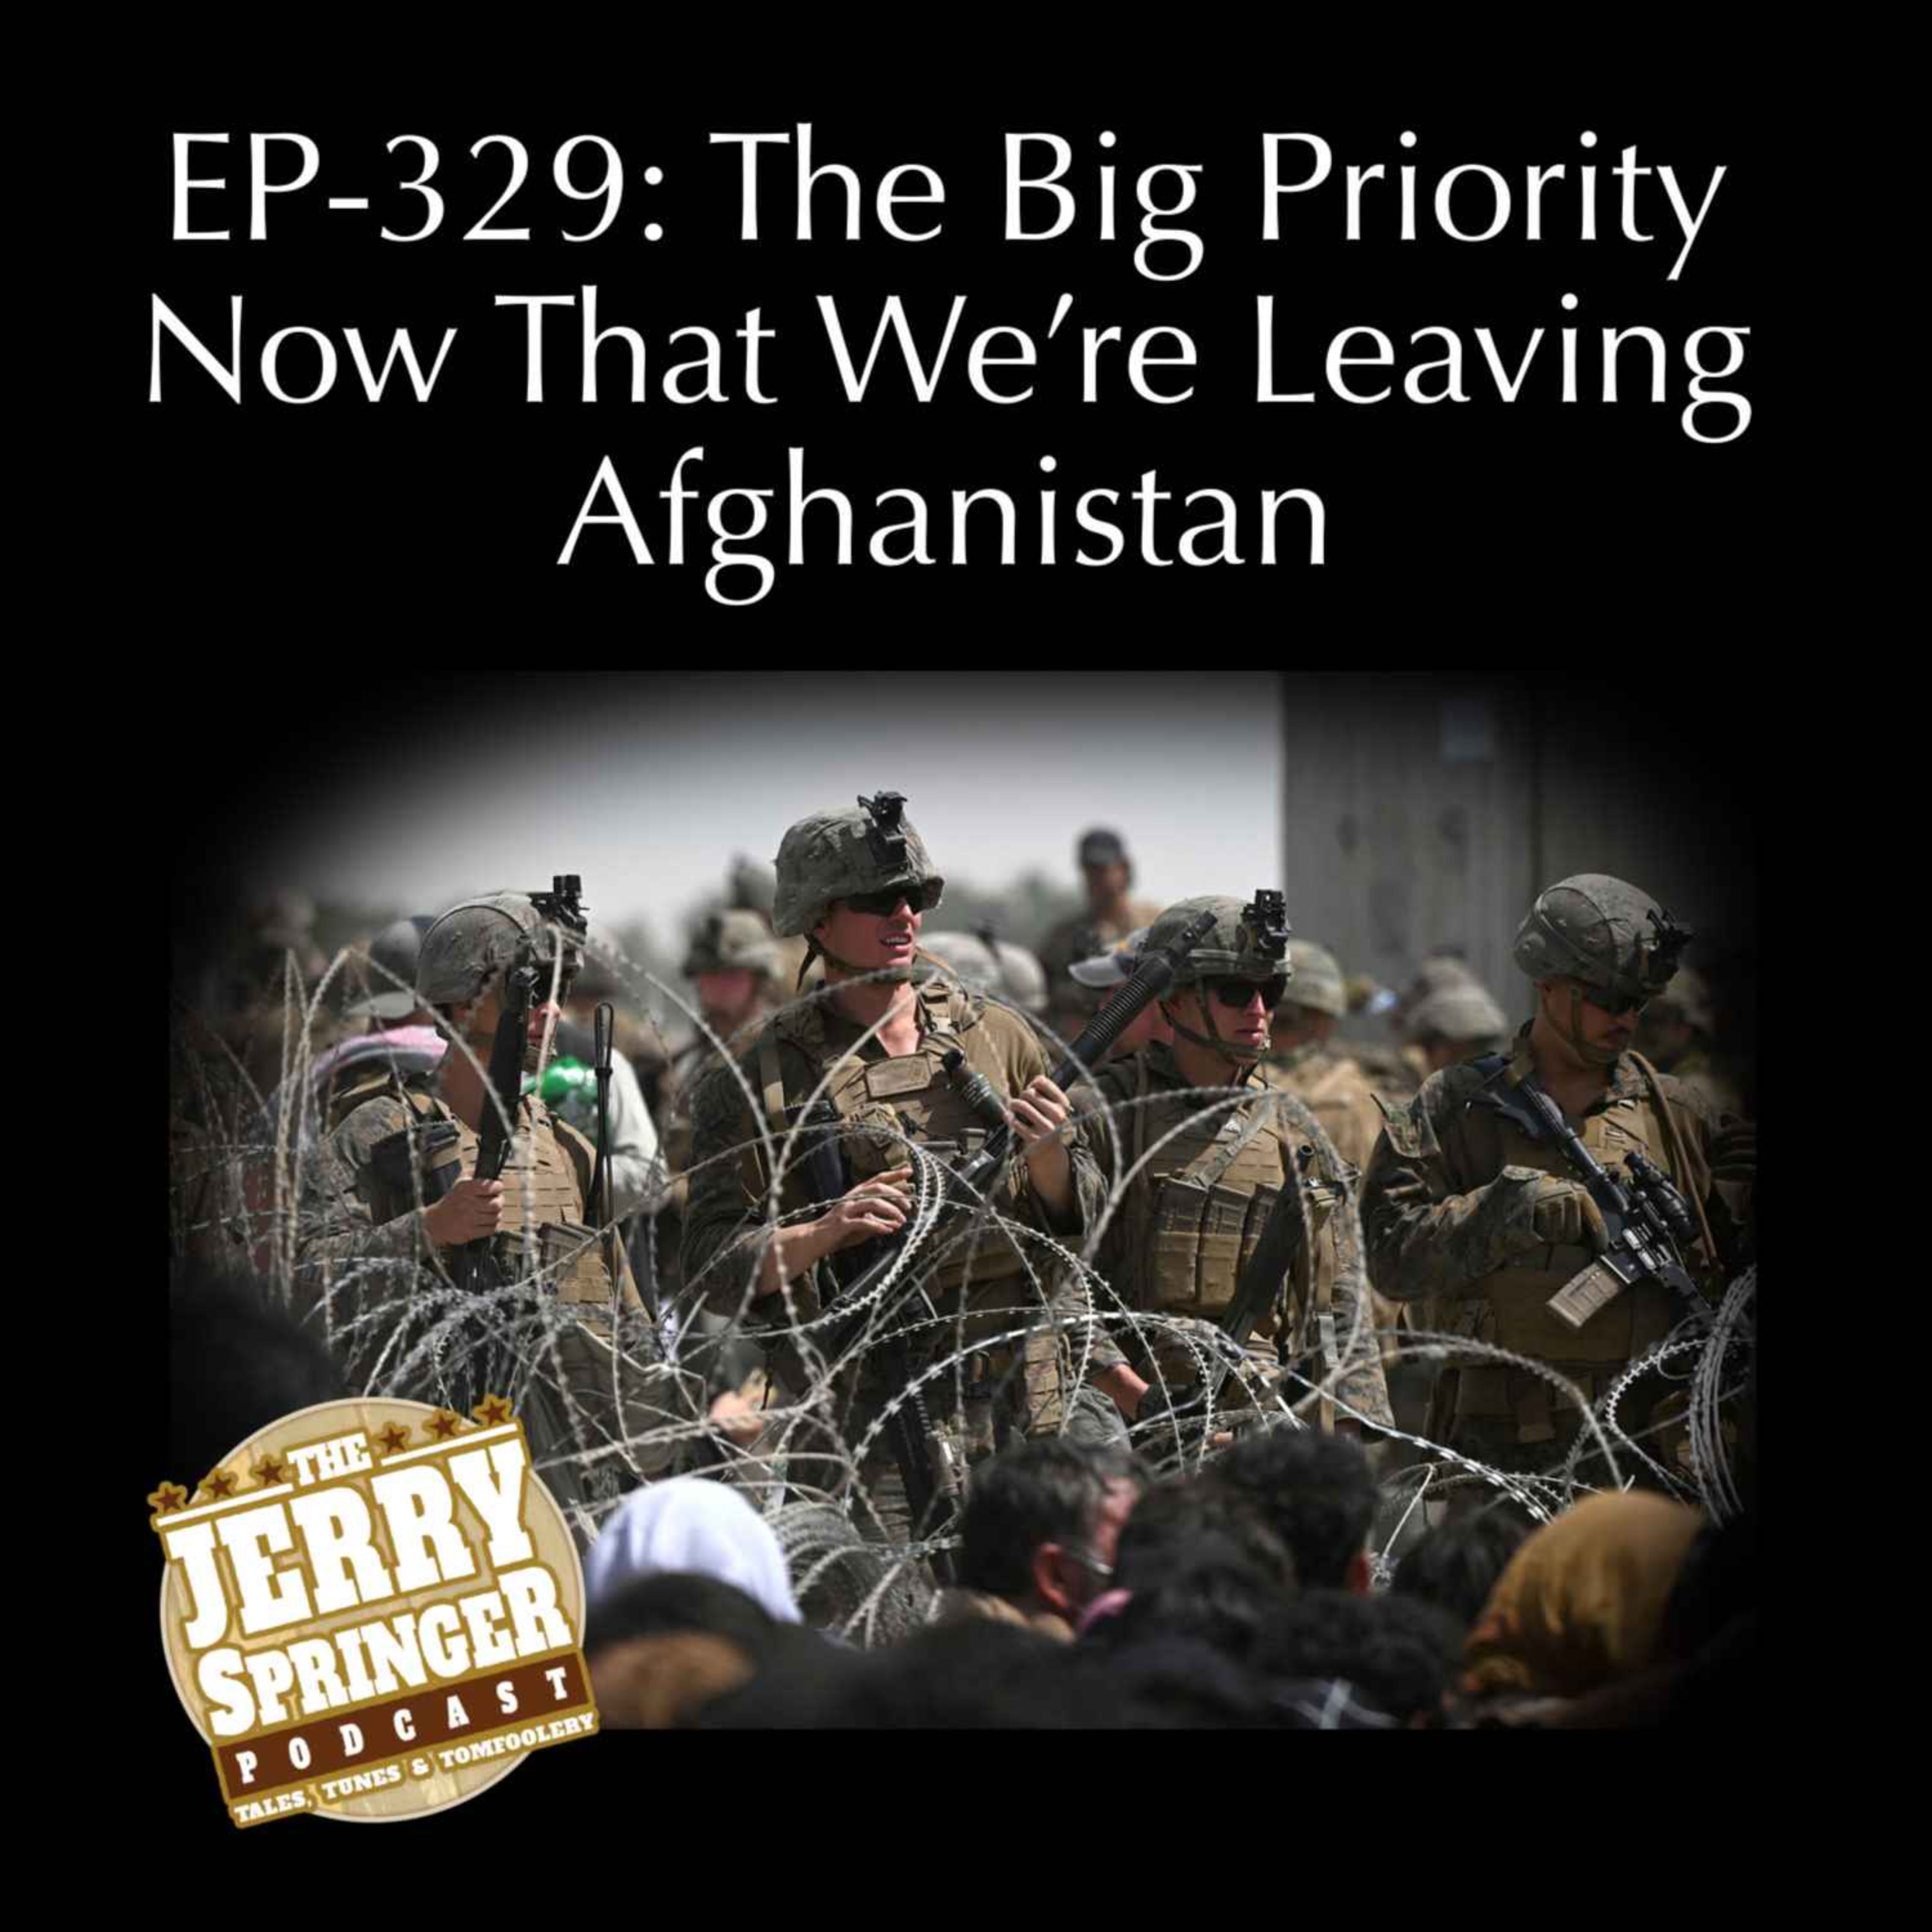 The Big Priority Now That We’re Leaving Afghanistan: EP-329